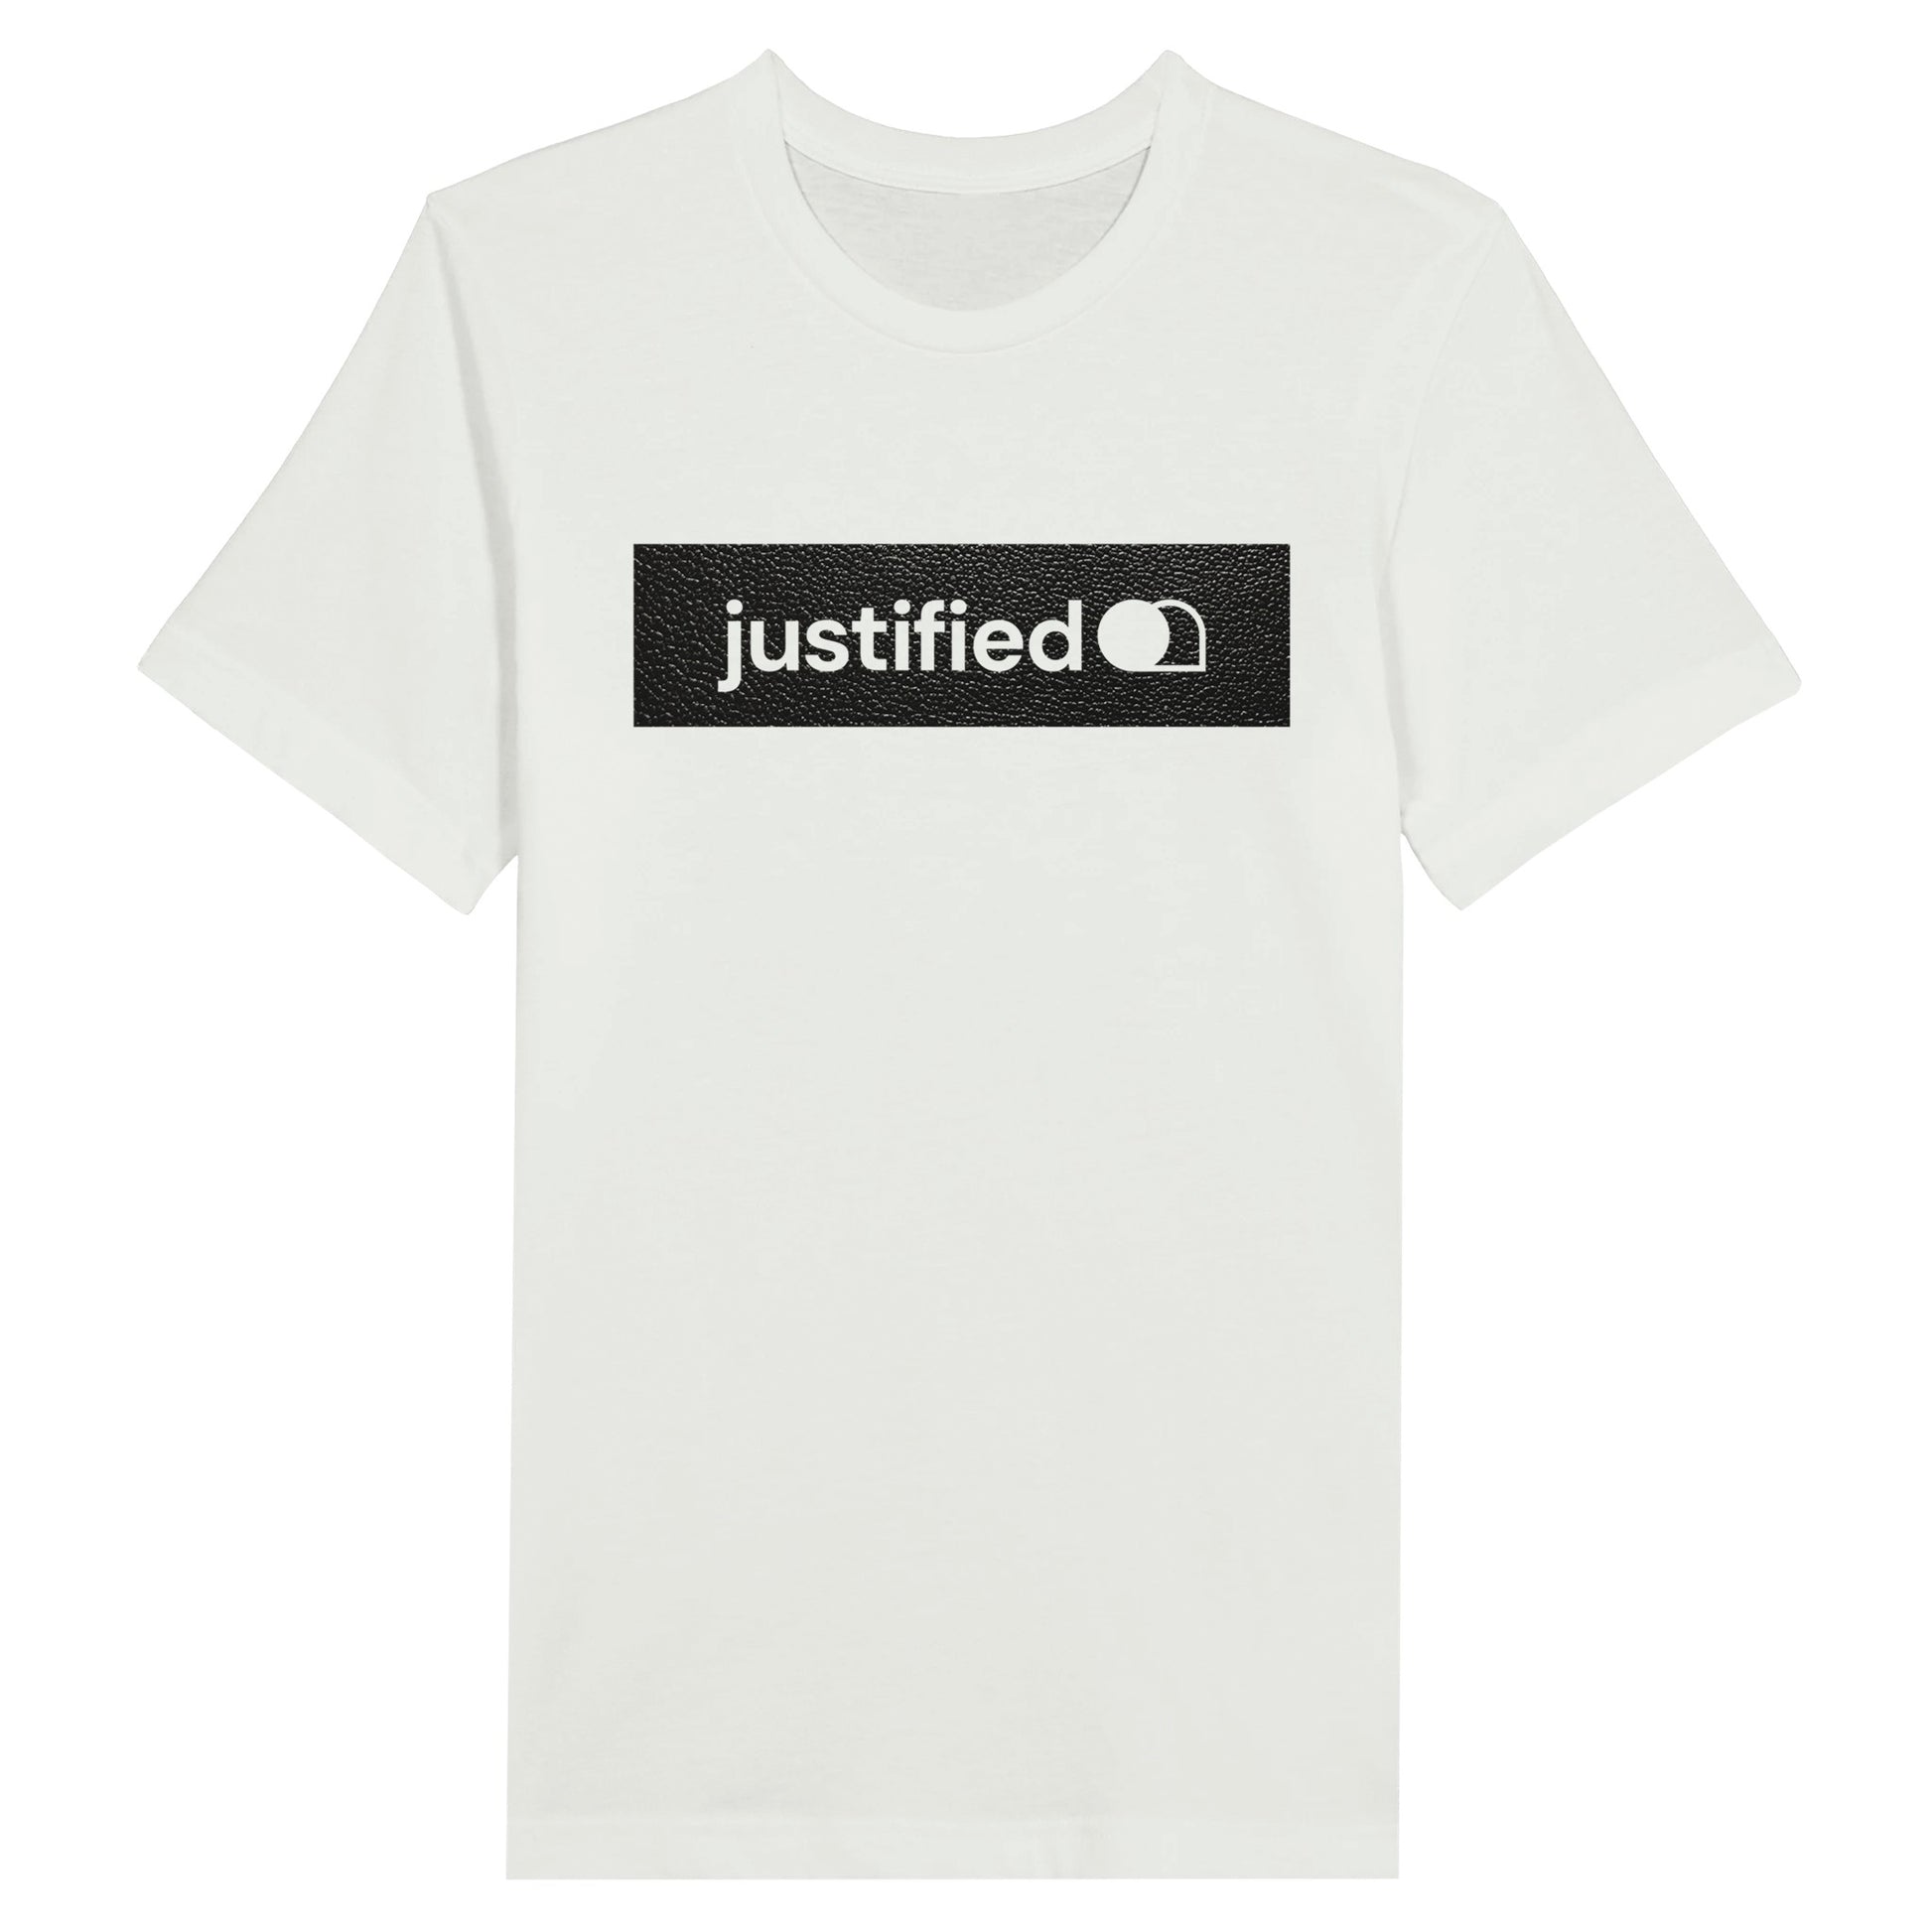 An image of justified (Black Leather Look) | Premium Unisex Christian T-shirt available at 3rd Day Christian Clothing UK